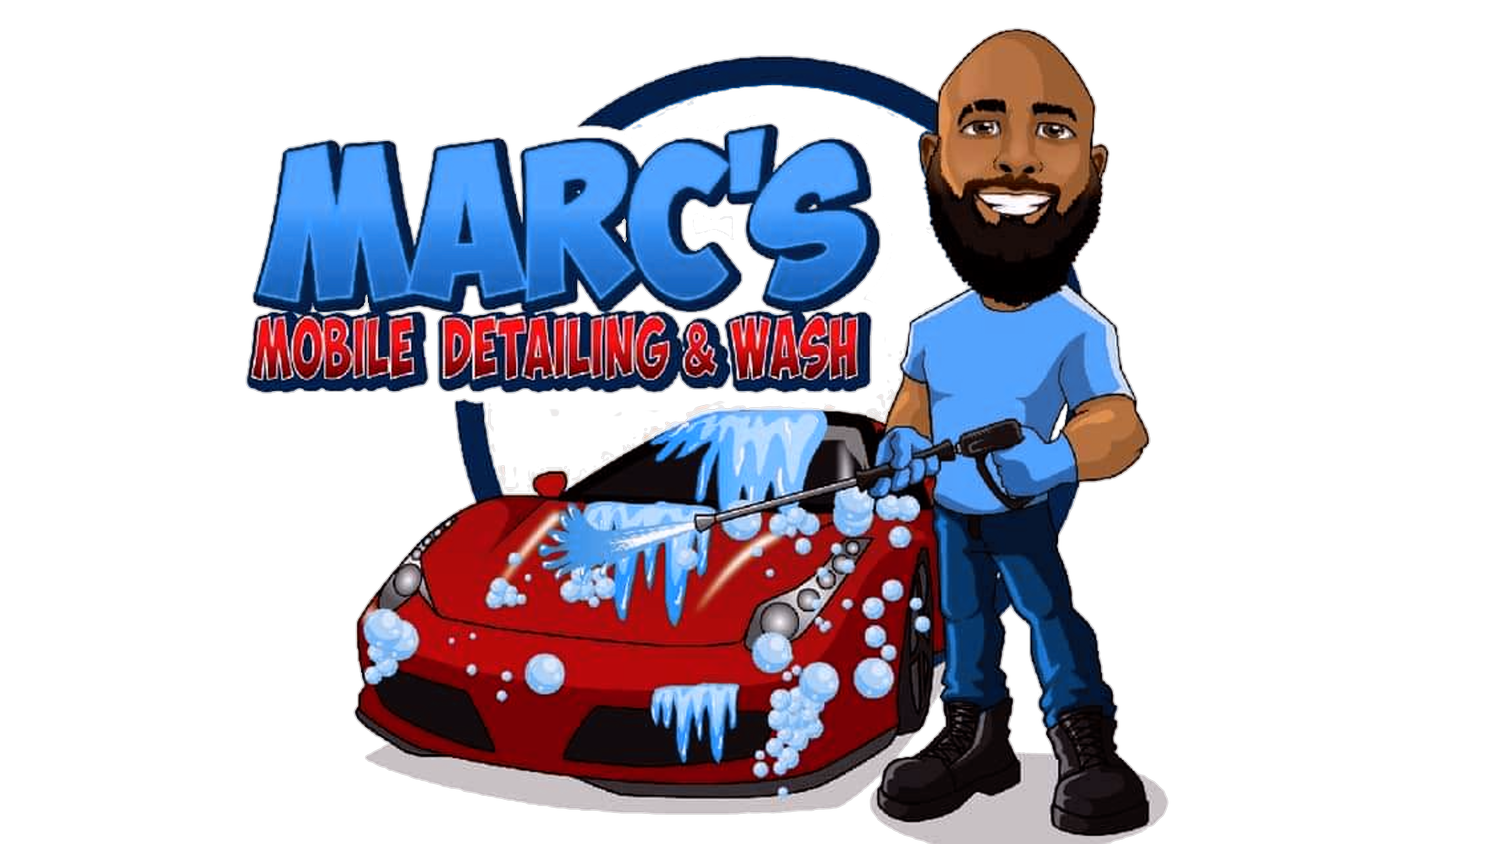 Marcs Mobile Detailing And Wash